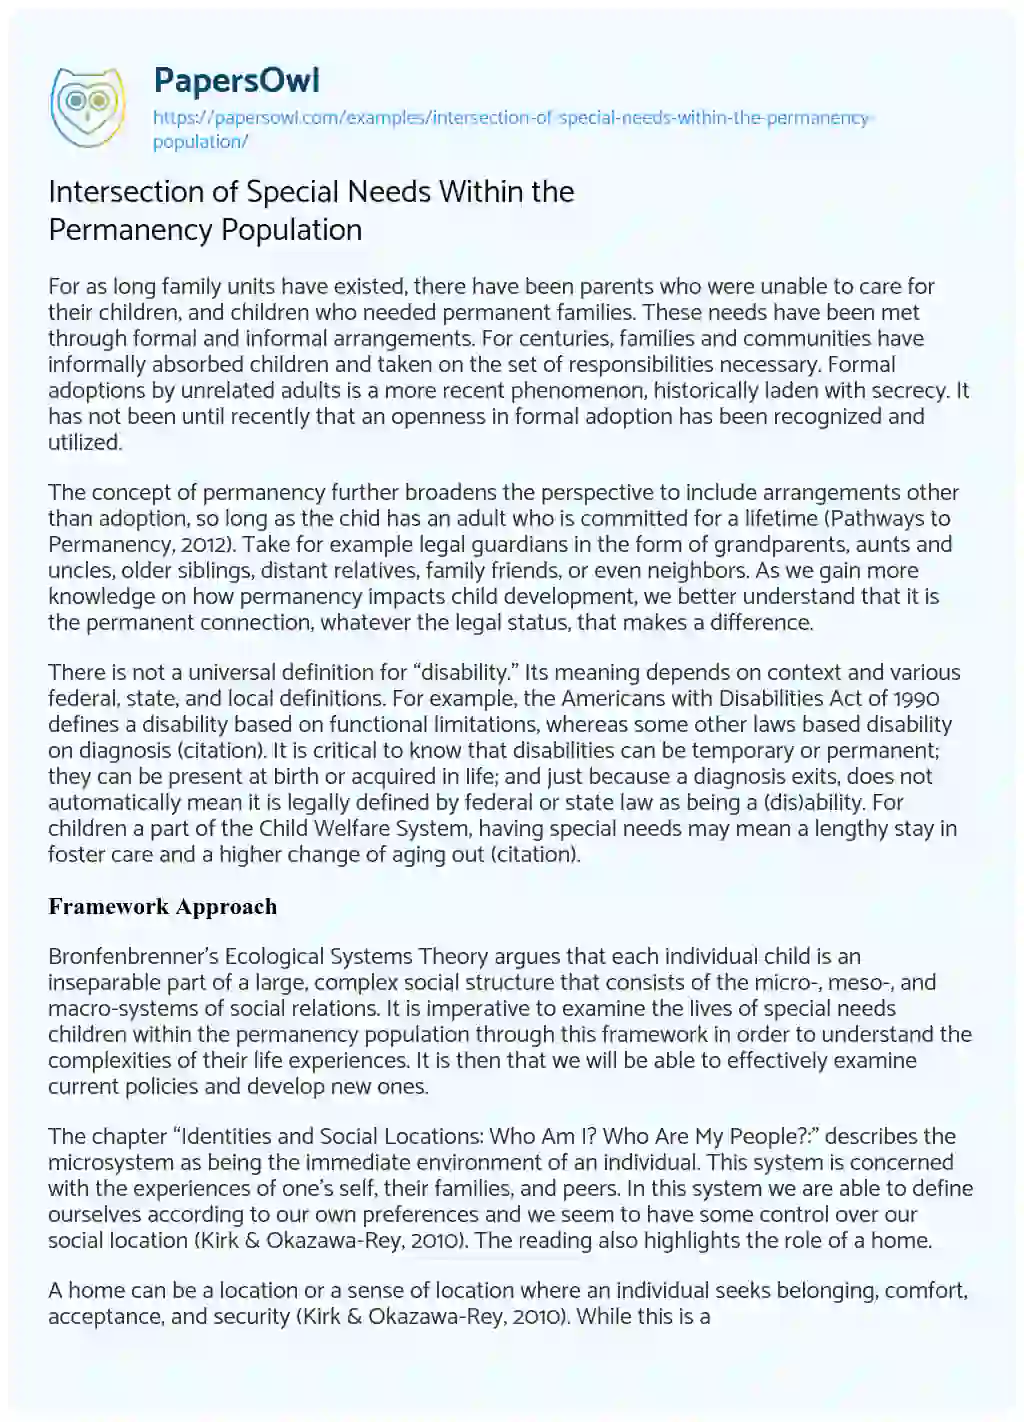 Essay on Intersection of Special Needs Within the Permanency Population